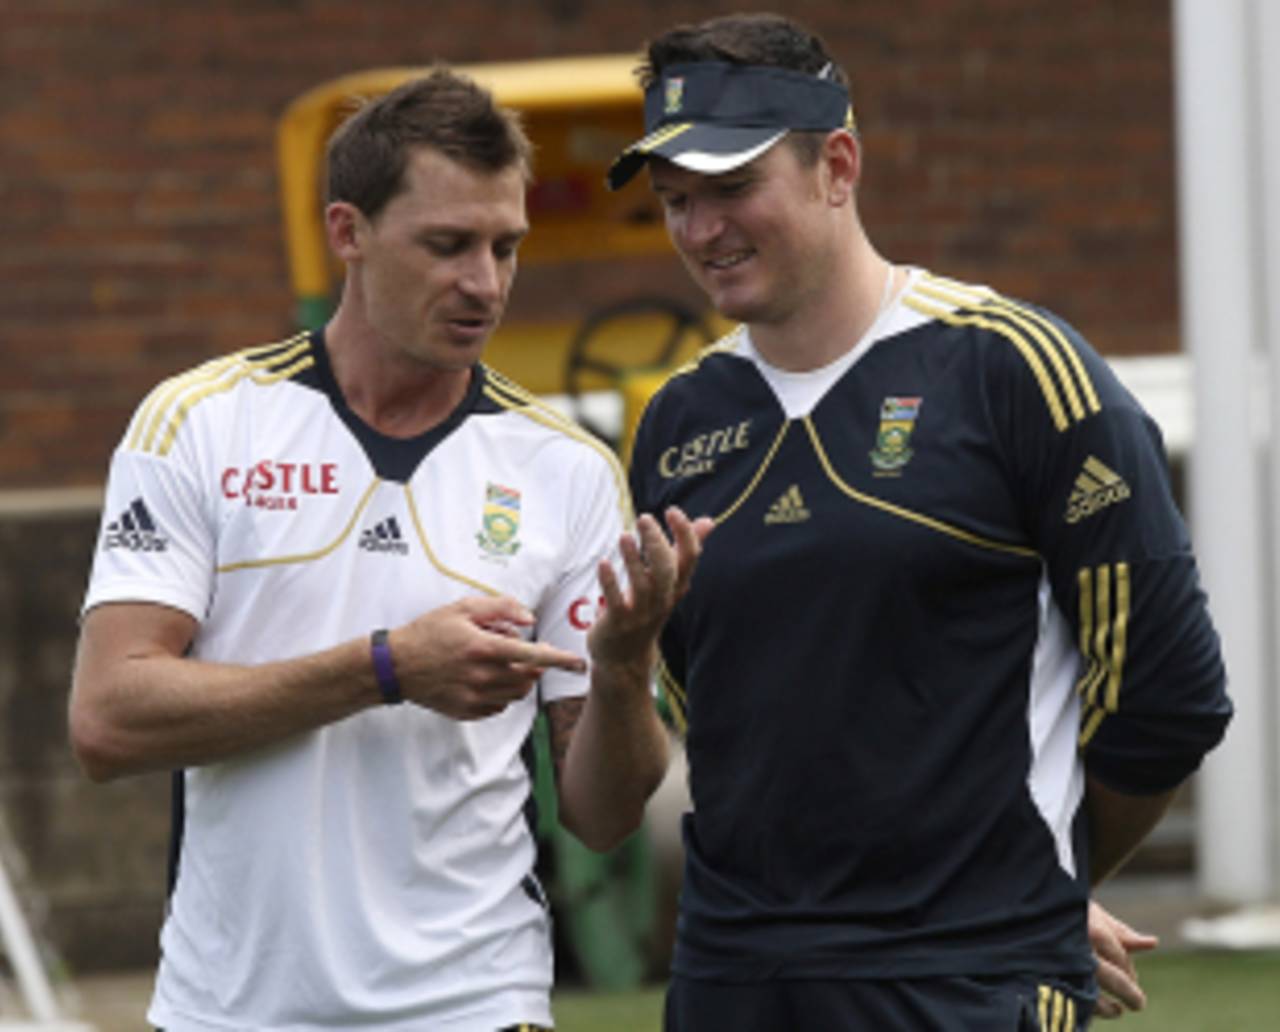 The management of Dale Steyn over the past few years has been impressive&nbsp;&nbsp;&bull;&nbsp;&nbsp;Associated Press